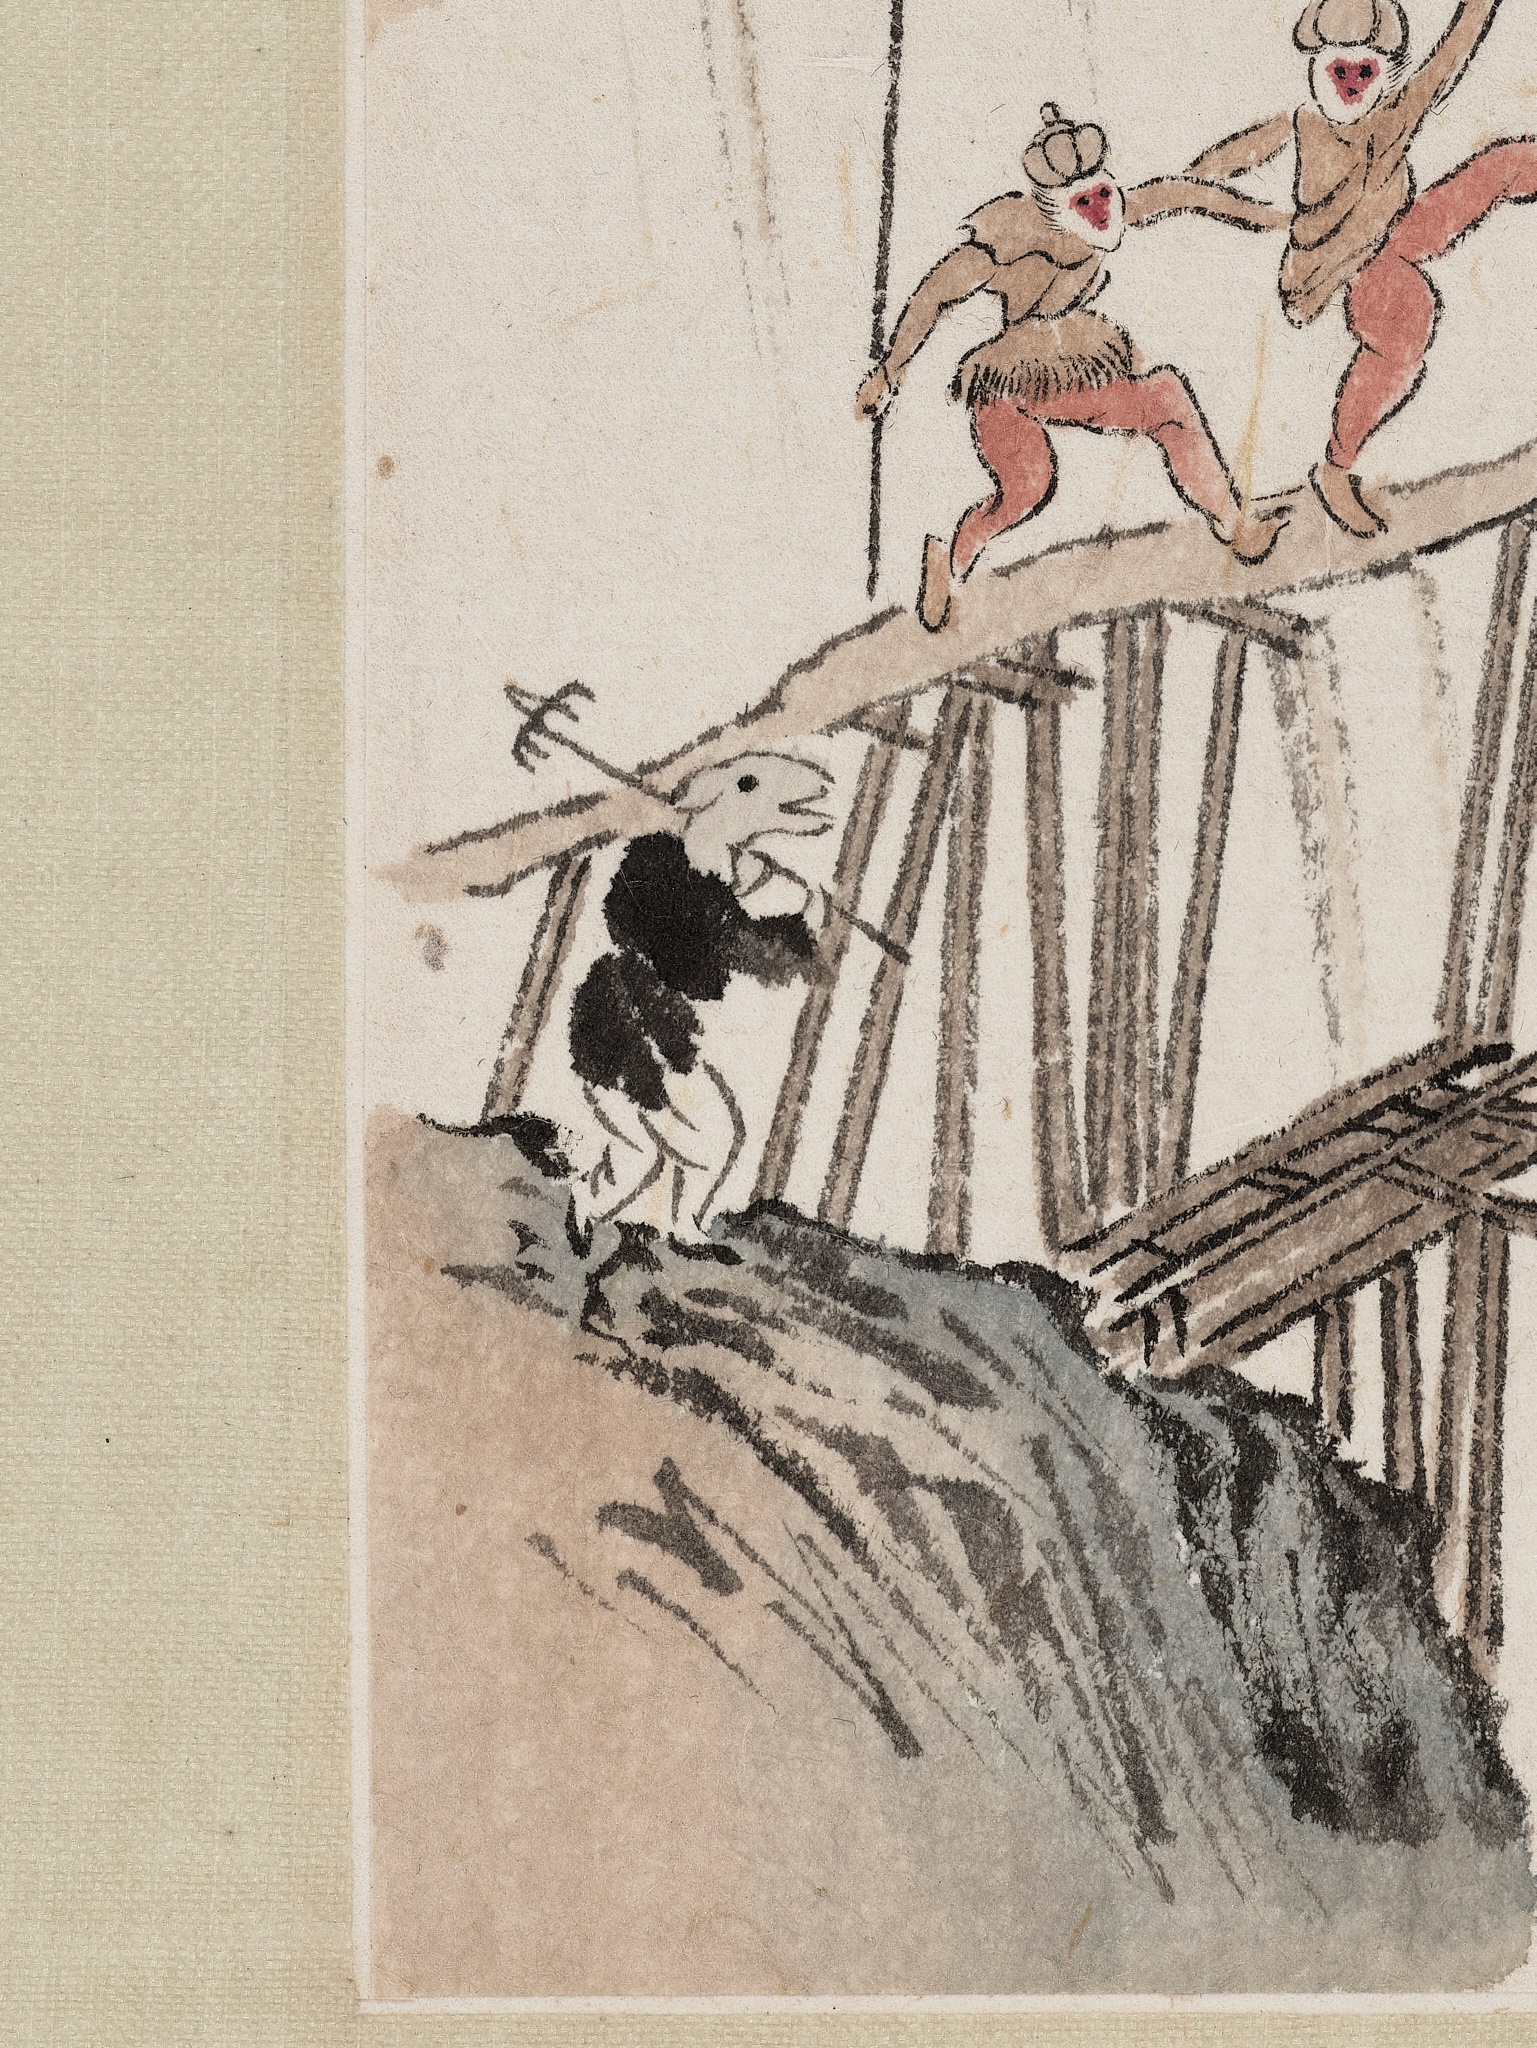 A SCENE FROM 'JOURNEY TO THE WEST', BY PU RU (1896-1963) - Image 6 of 10